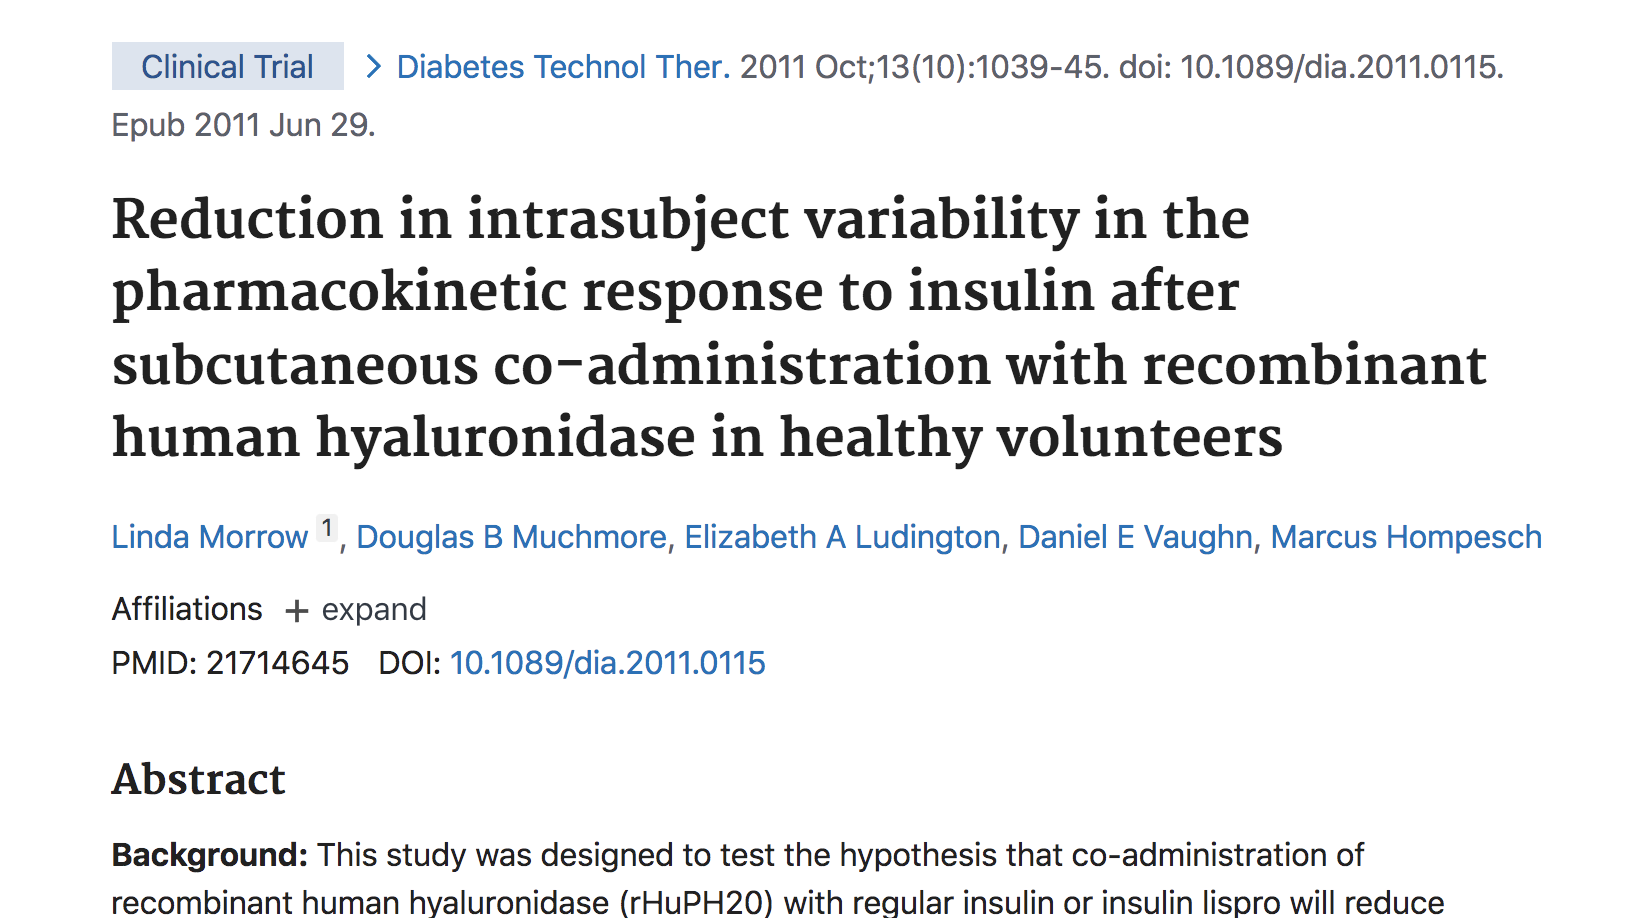 image of Reduction in intrasubject variability in the pharmacokinetic response to insulin after subcutaneous co-administration with recombinant human hyaluronidase in healthy volunteers